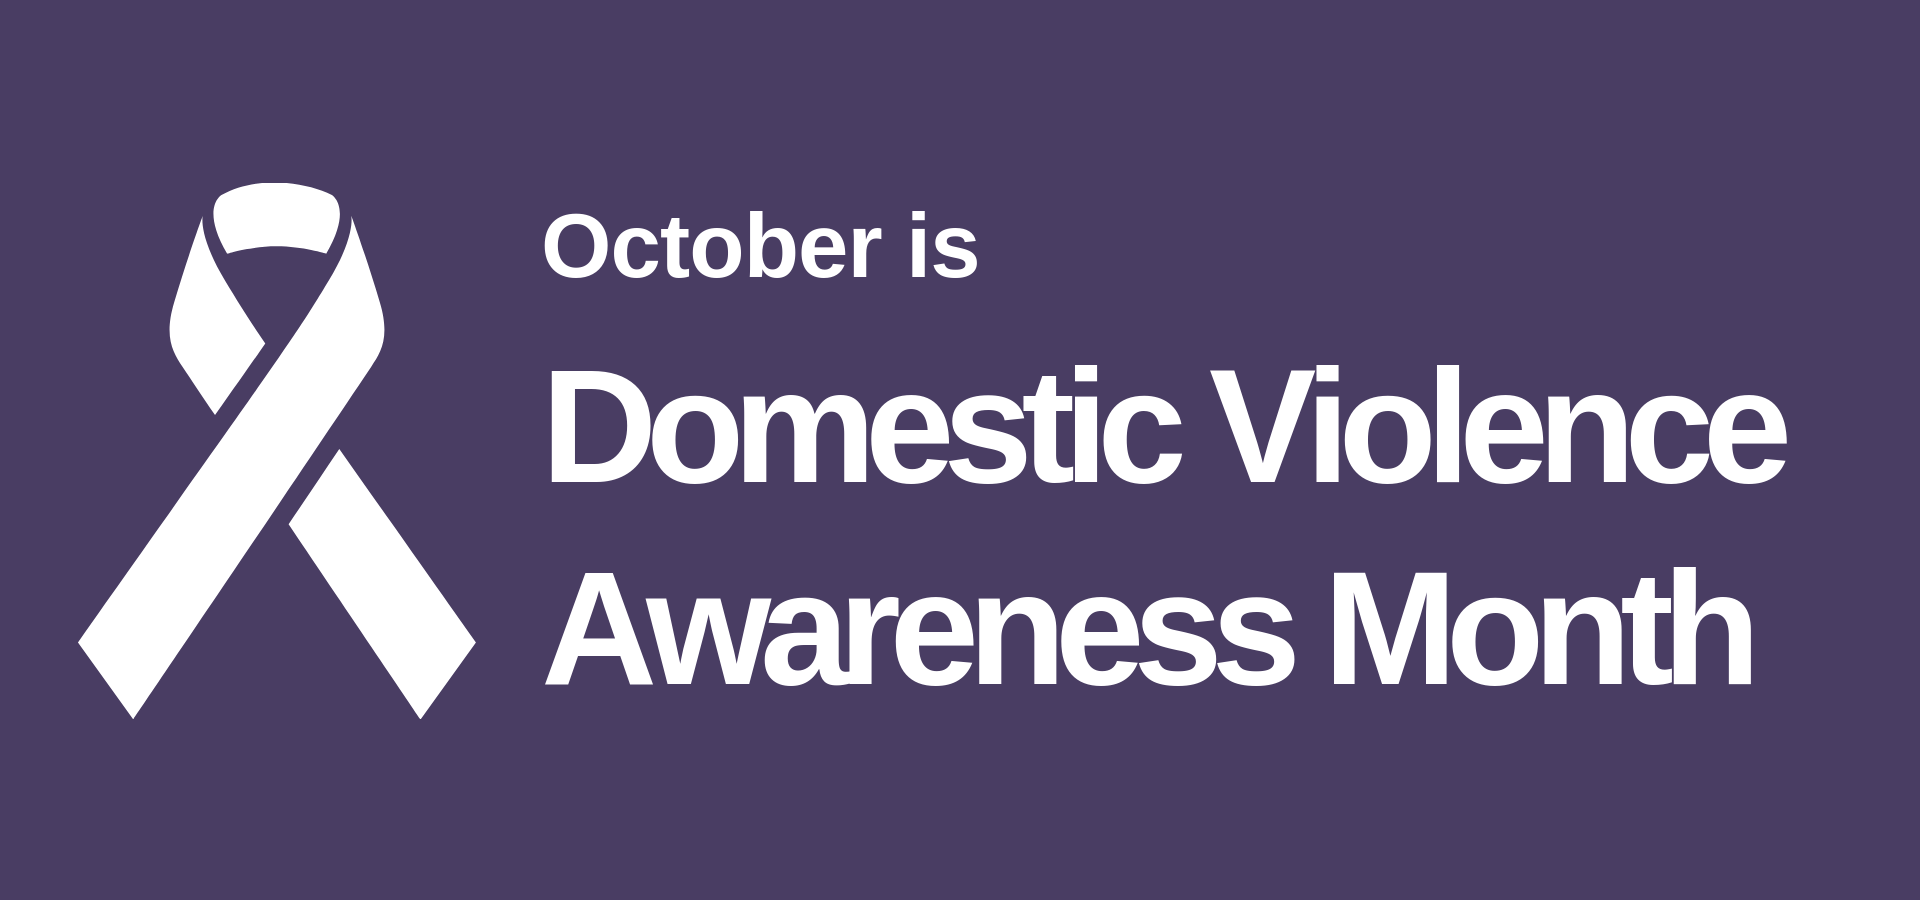 October Is Domestic Violence Awareness Month Safehouse Center Domestic Violence Services 5859